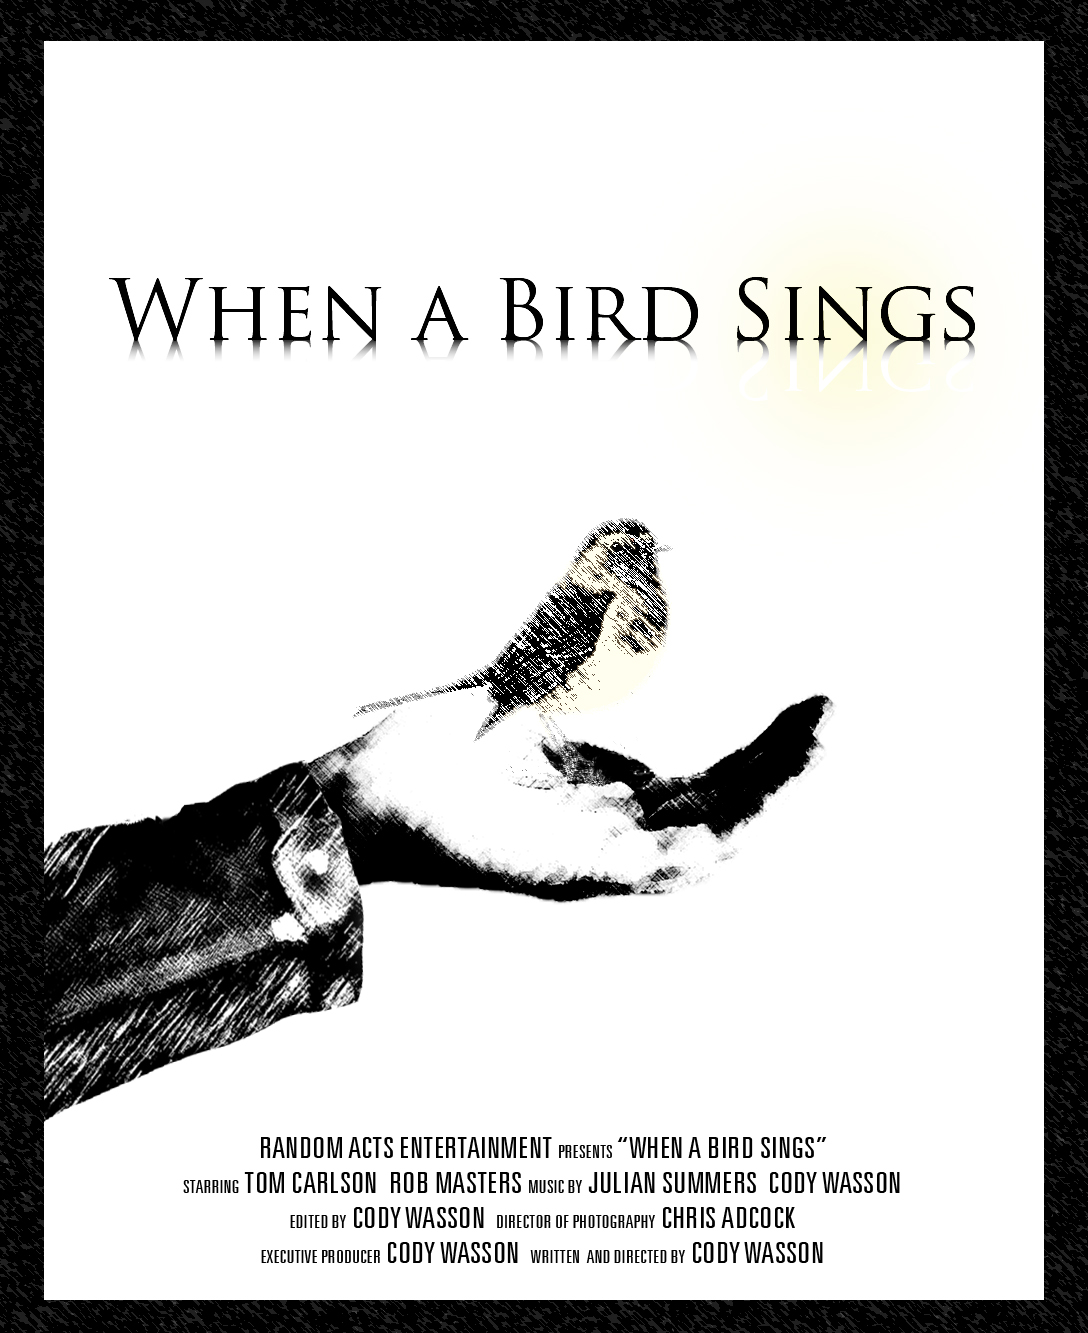 When a Bird Sings Short film written and directed by Cody Wasson